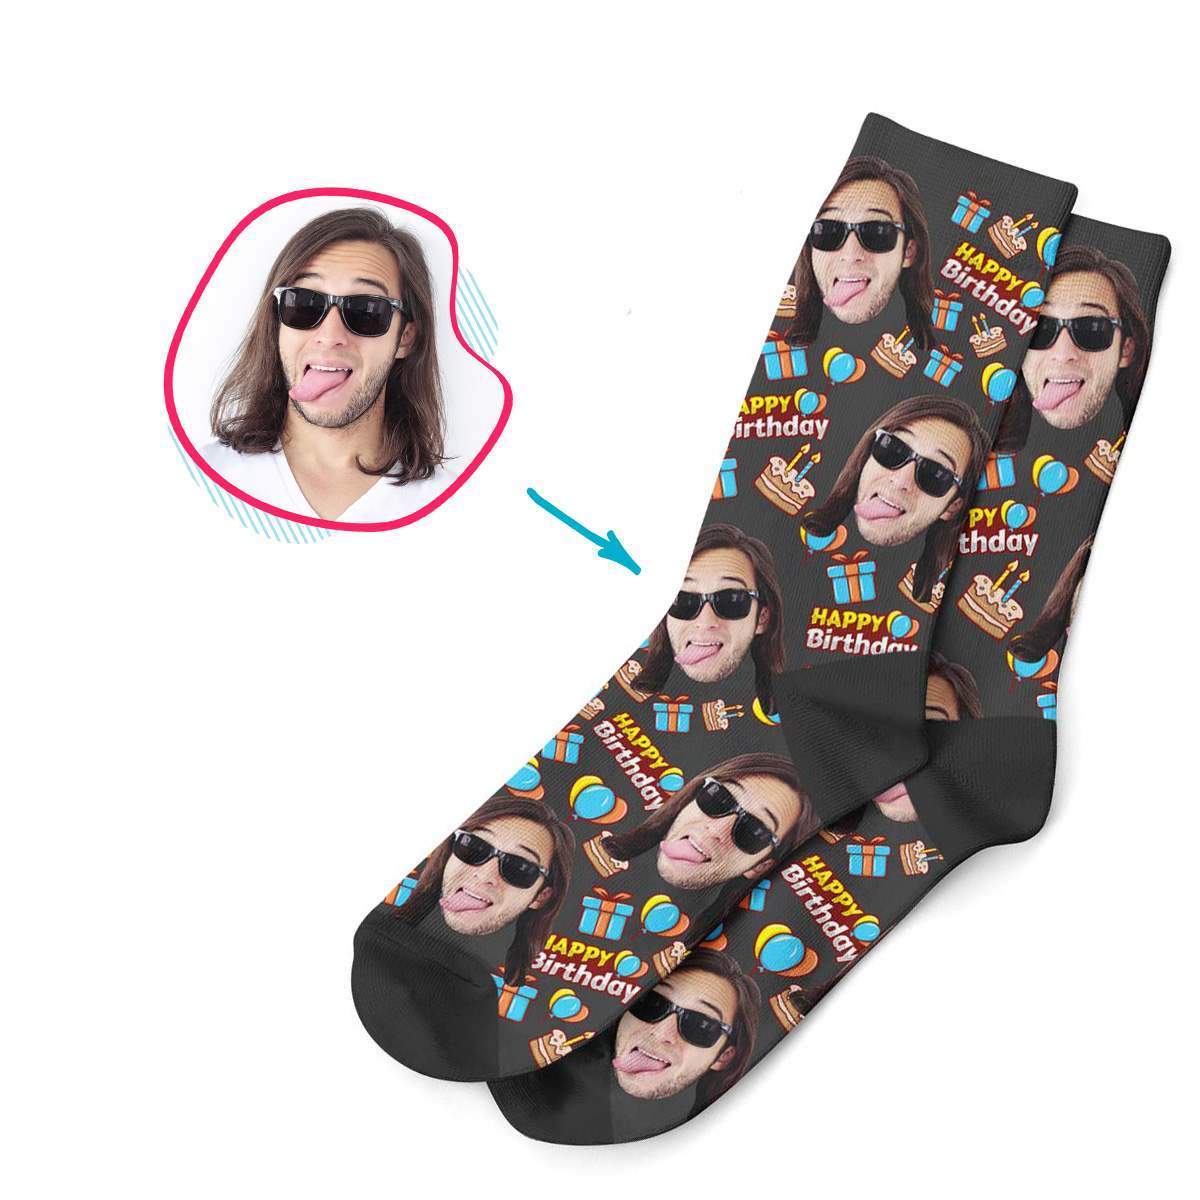 dark Birthday socks personalized with photo of face printed on them